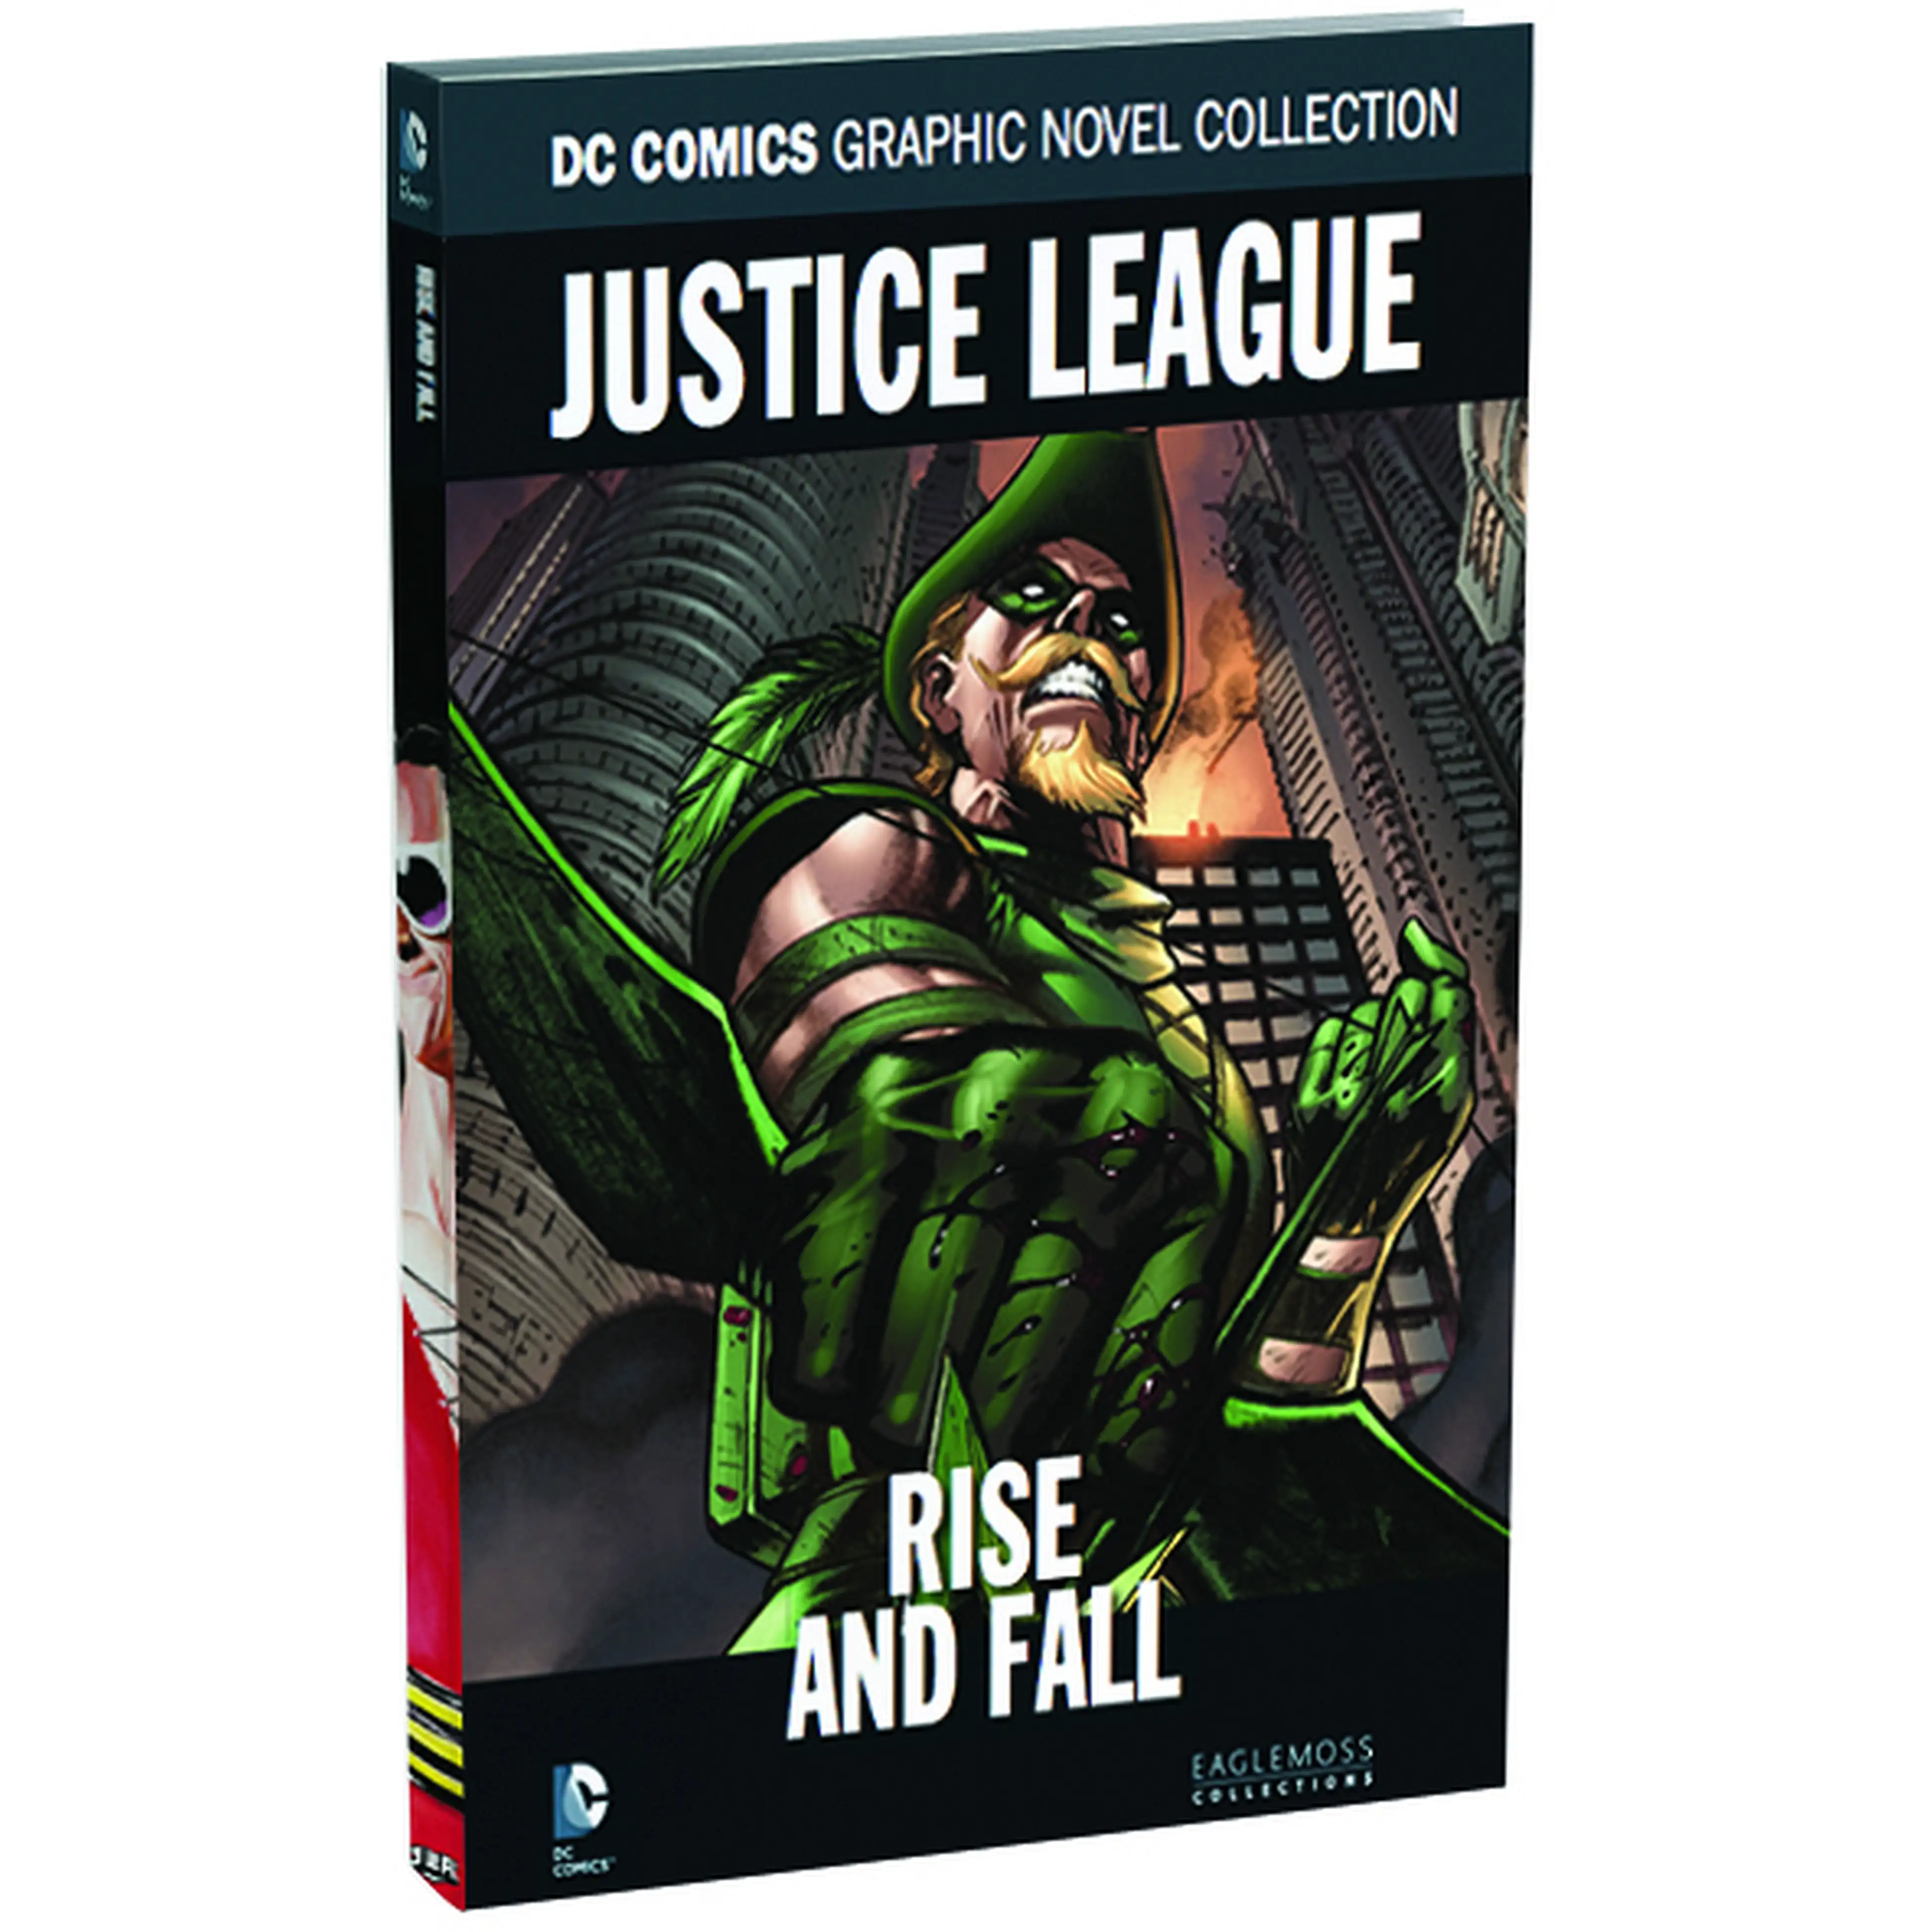 DC Comics Graphic Novel Collection Justice League - Rise and Fall